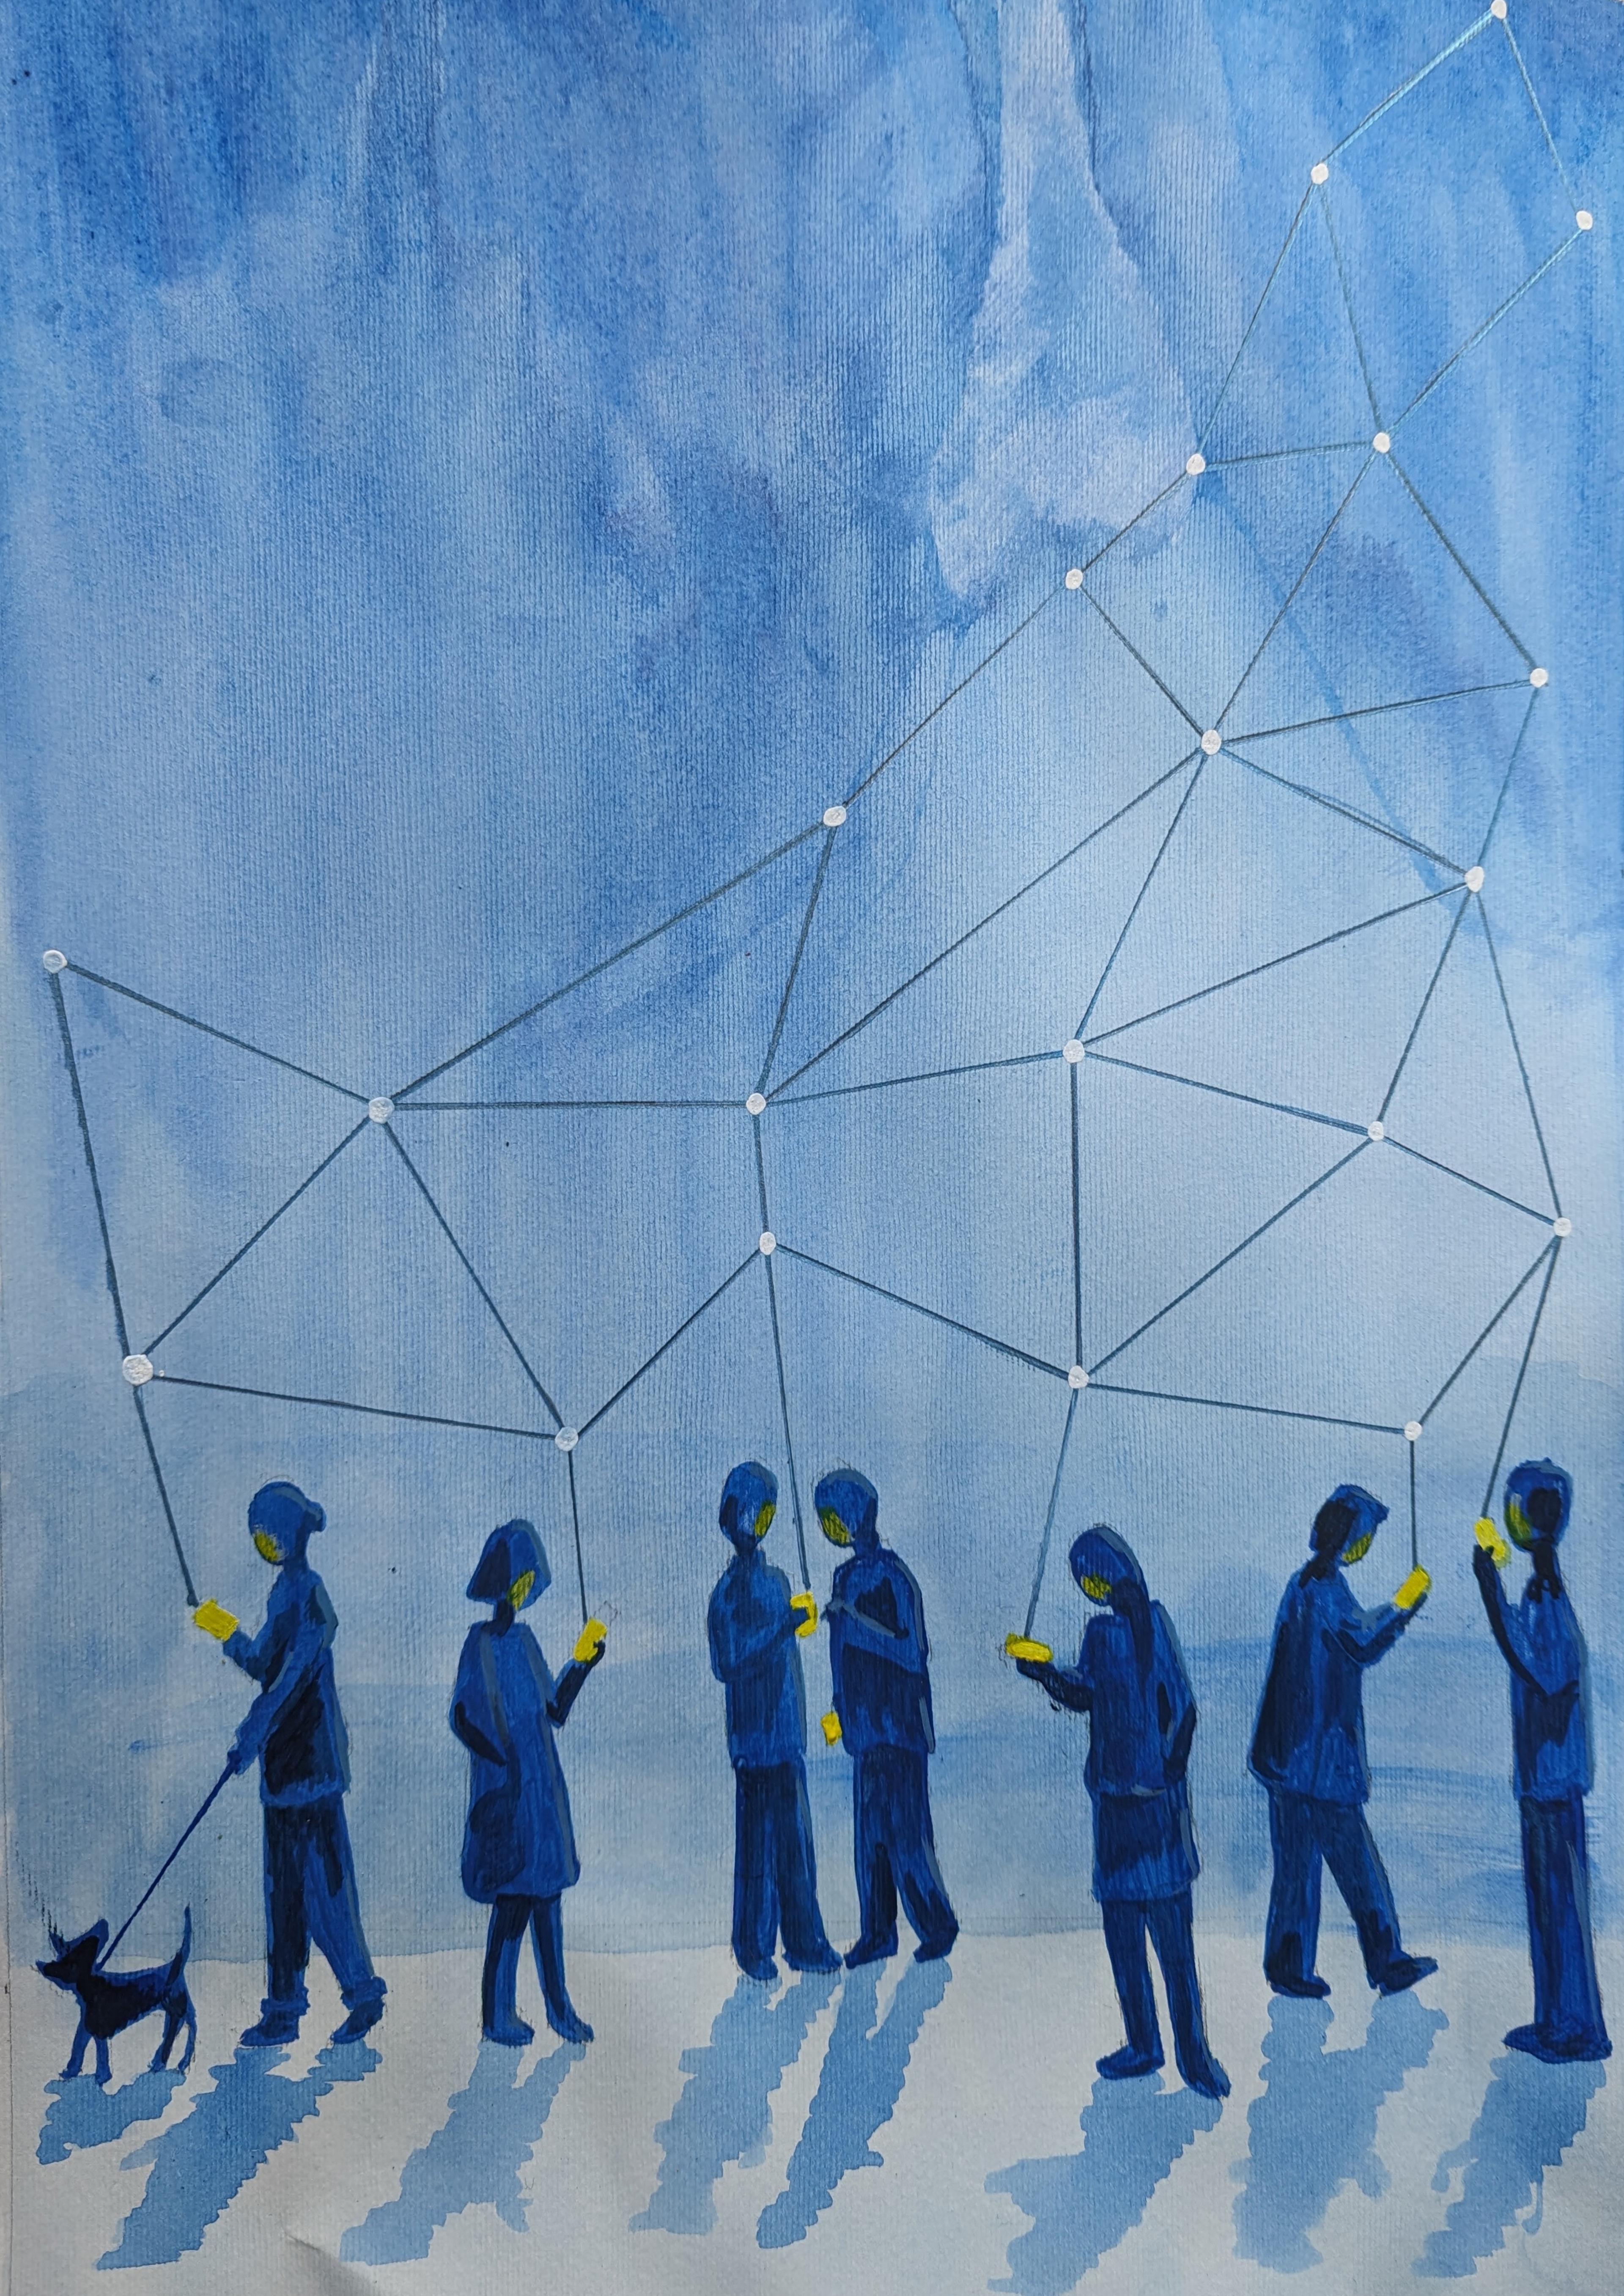 Seven people and a dog are illustrated in watercolour standing against a light blue background, in a variety of poses but all intently looking at their mobile phones. They are coloured in blue with yellow detail, and cast blue shadows. Their phones are all connected via a web like network in the air, showing various connection points. The image is portrait shape and allows space for text in the top left hand corner.